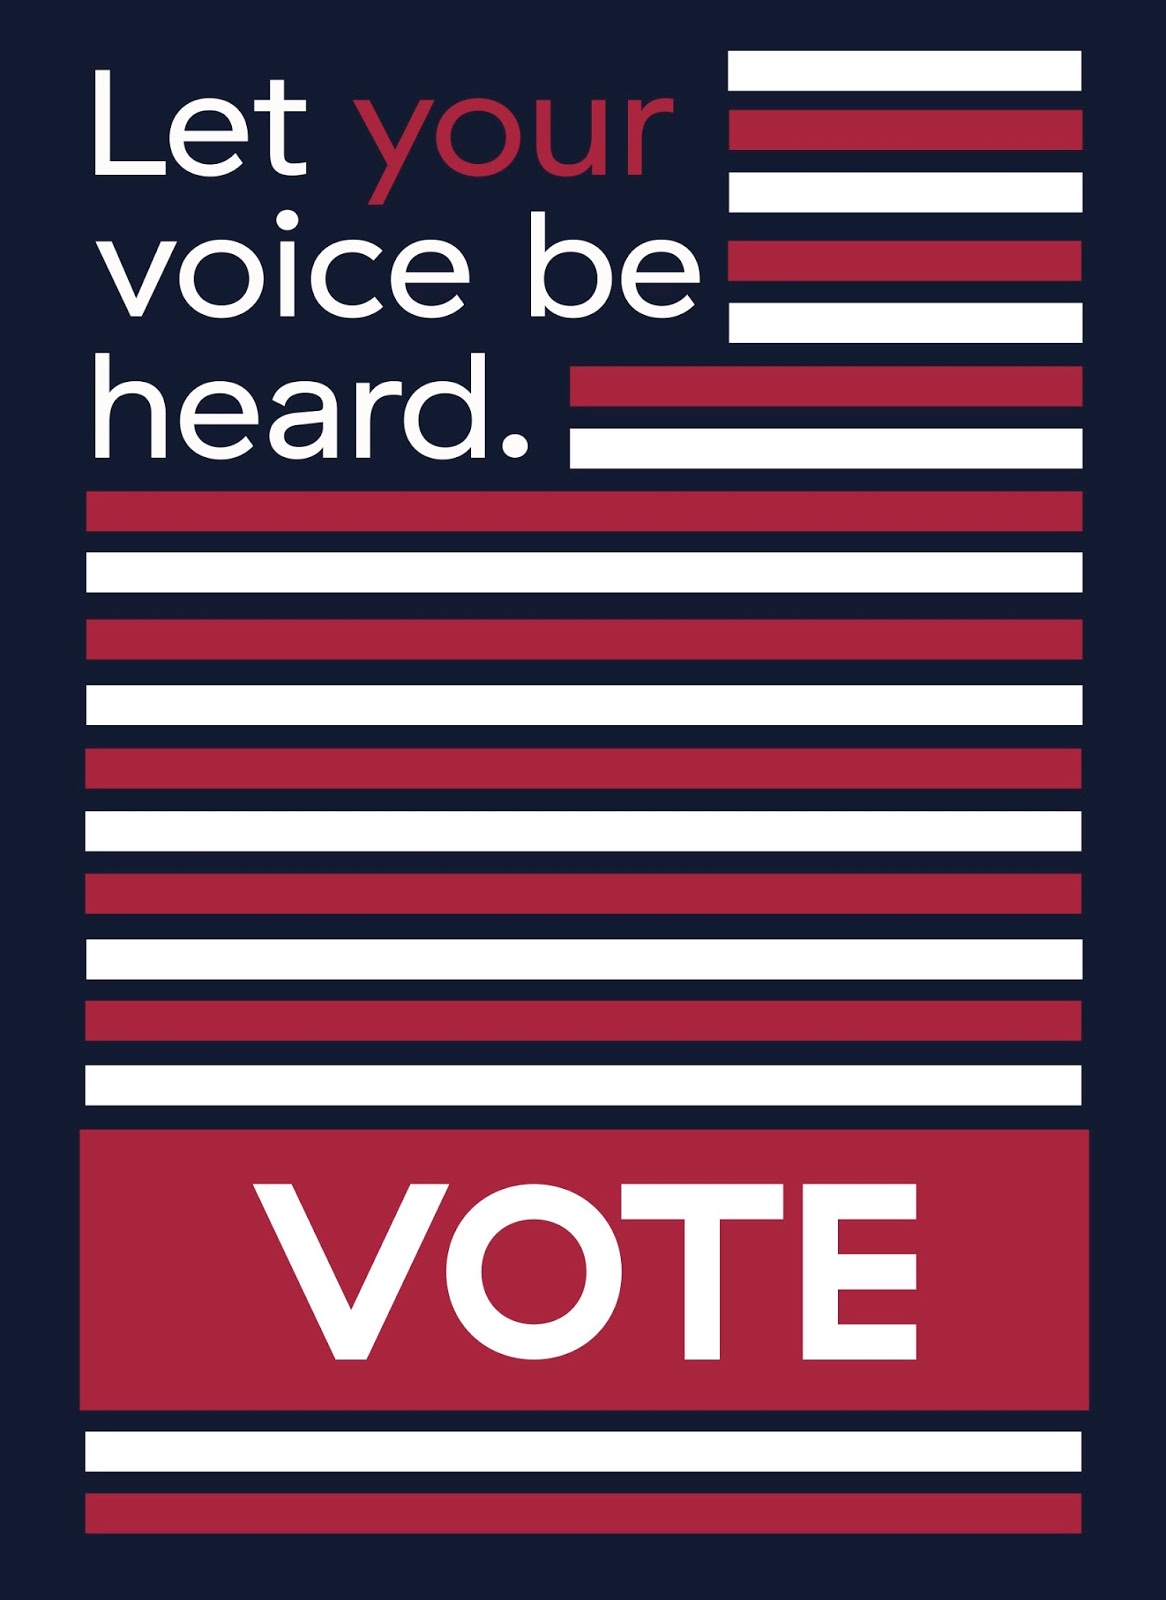 Vote day. Lets vote. Vote for posters. Lets go voter.